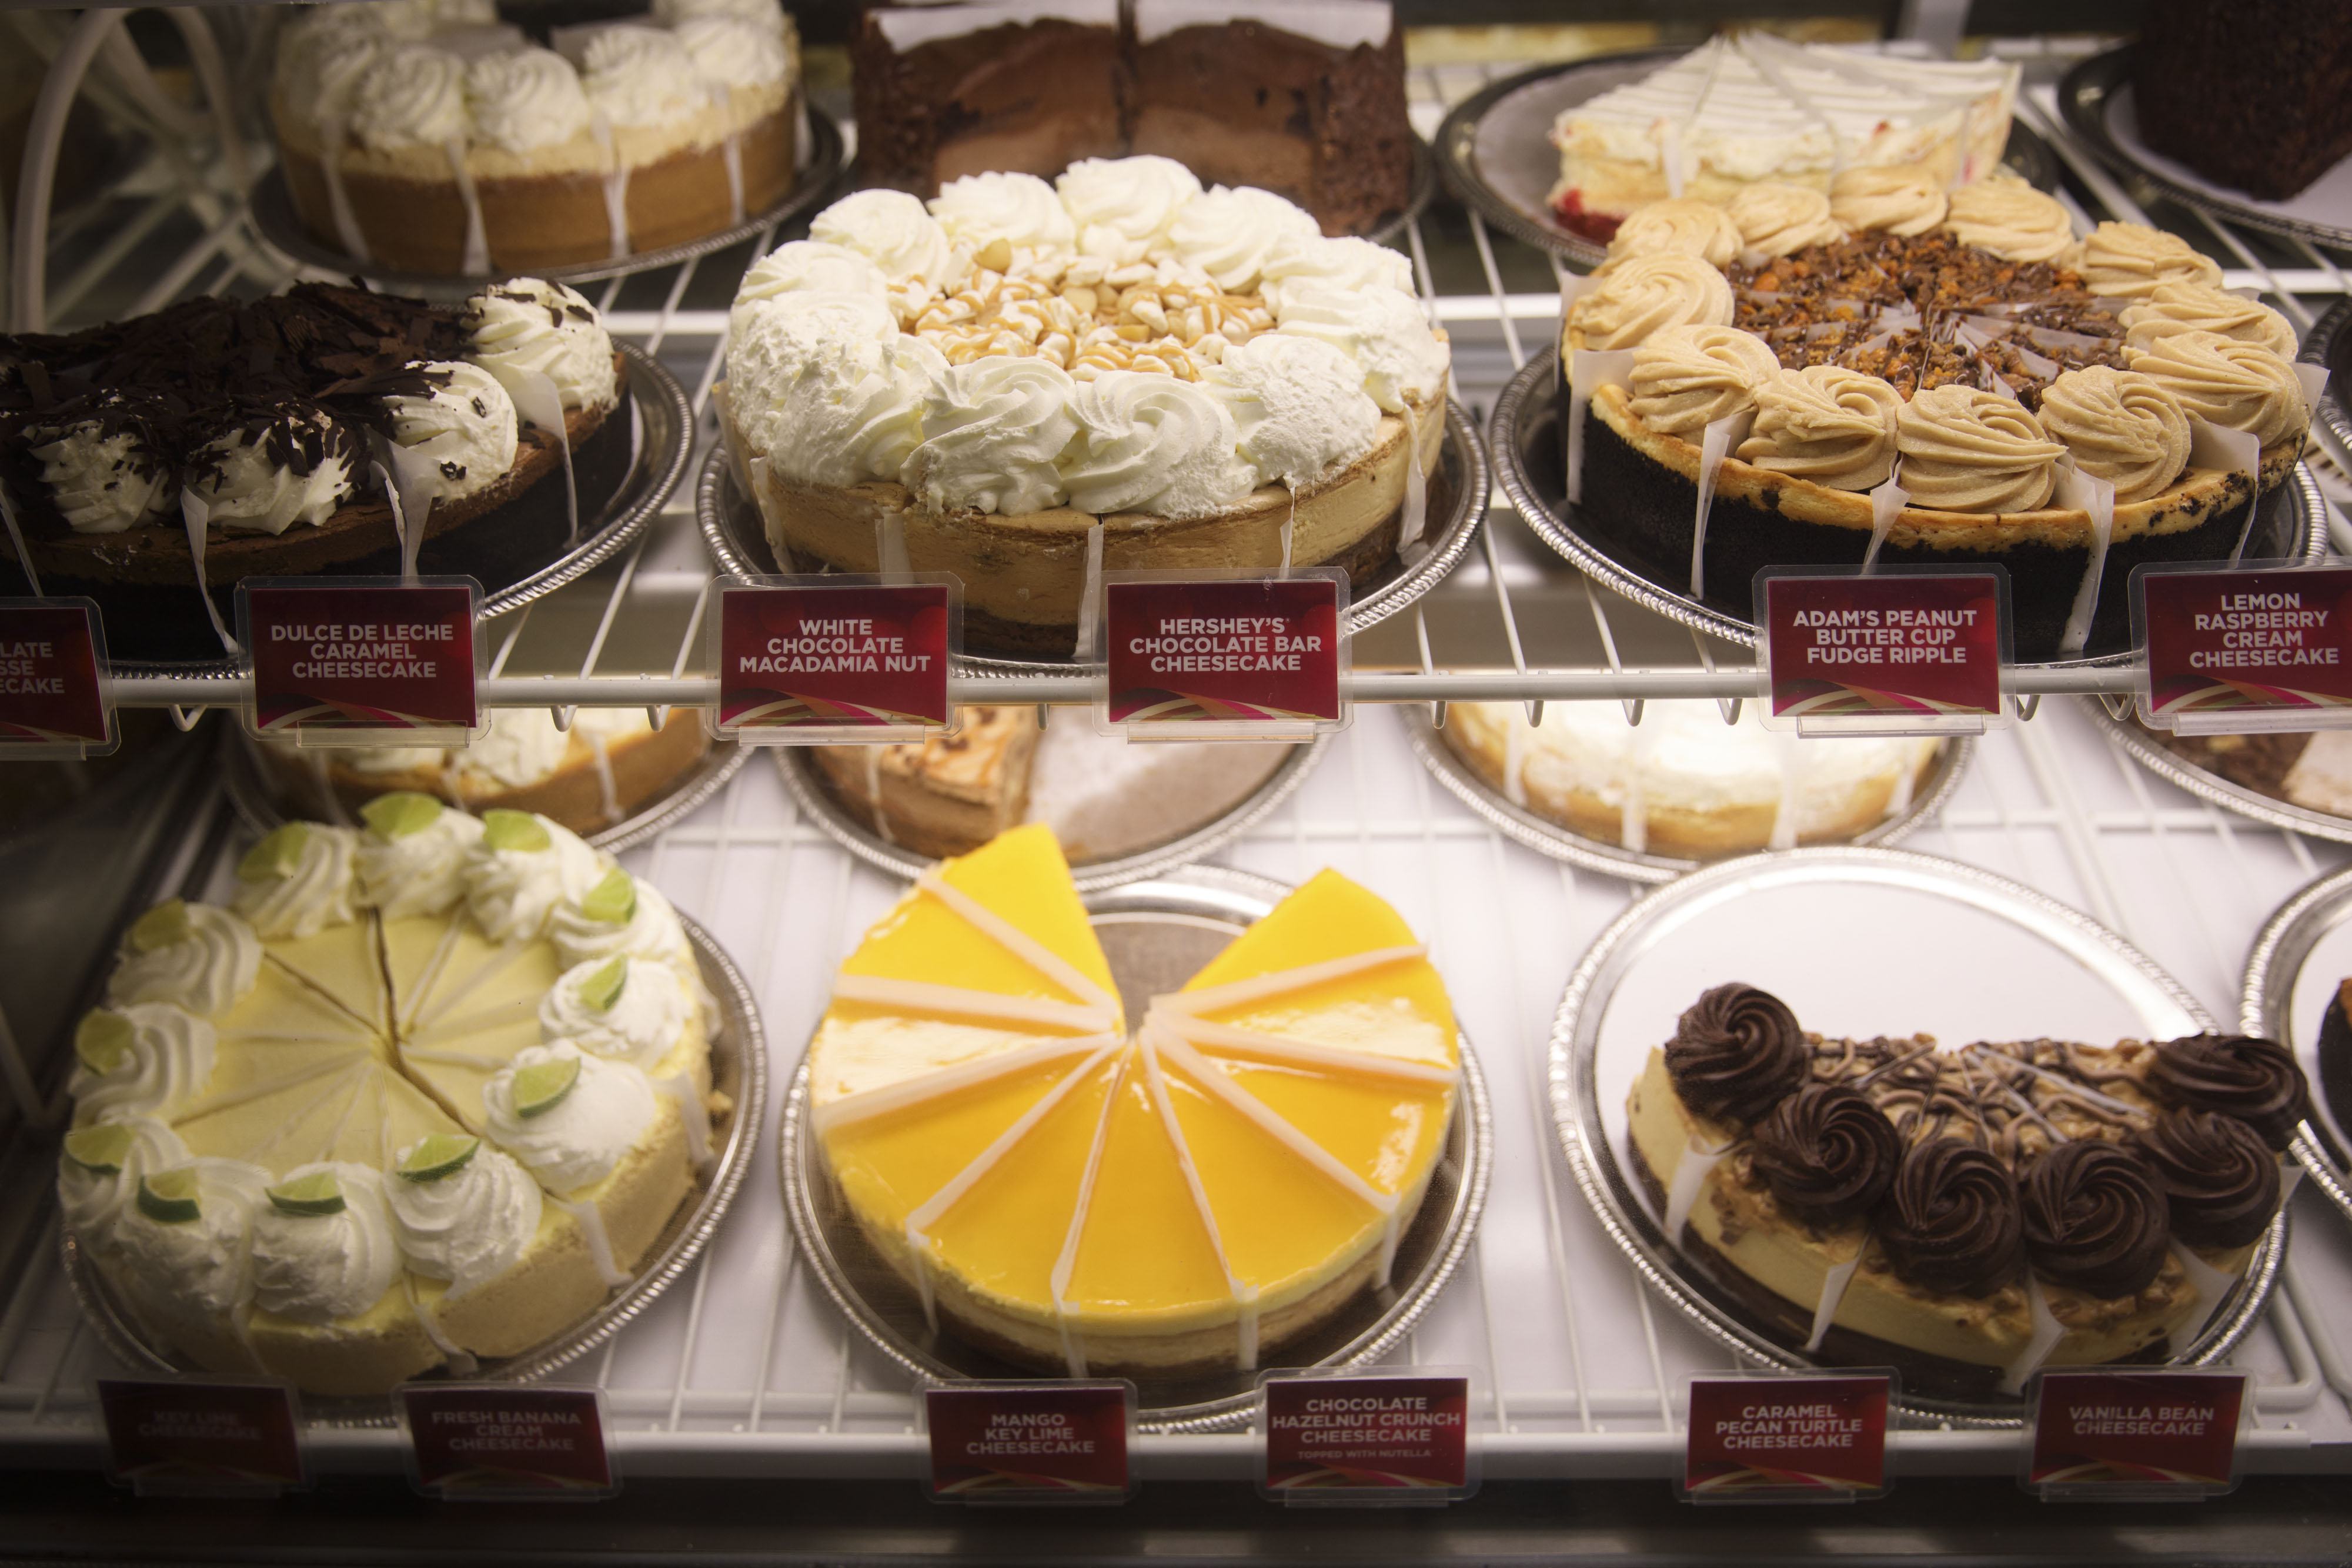 Order the Cheesecake Factory Delivery and Get a Free Cheesecake